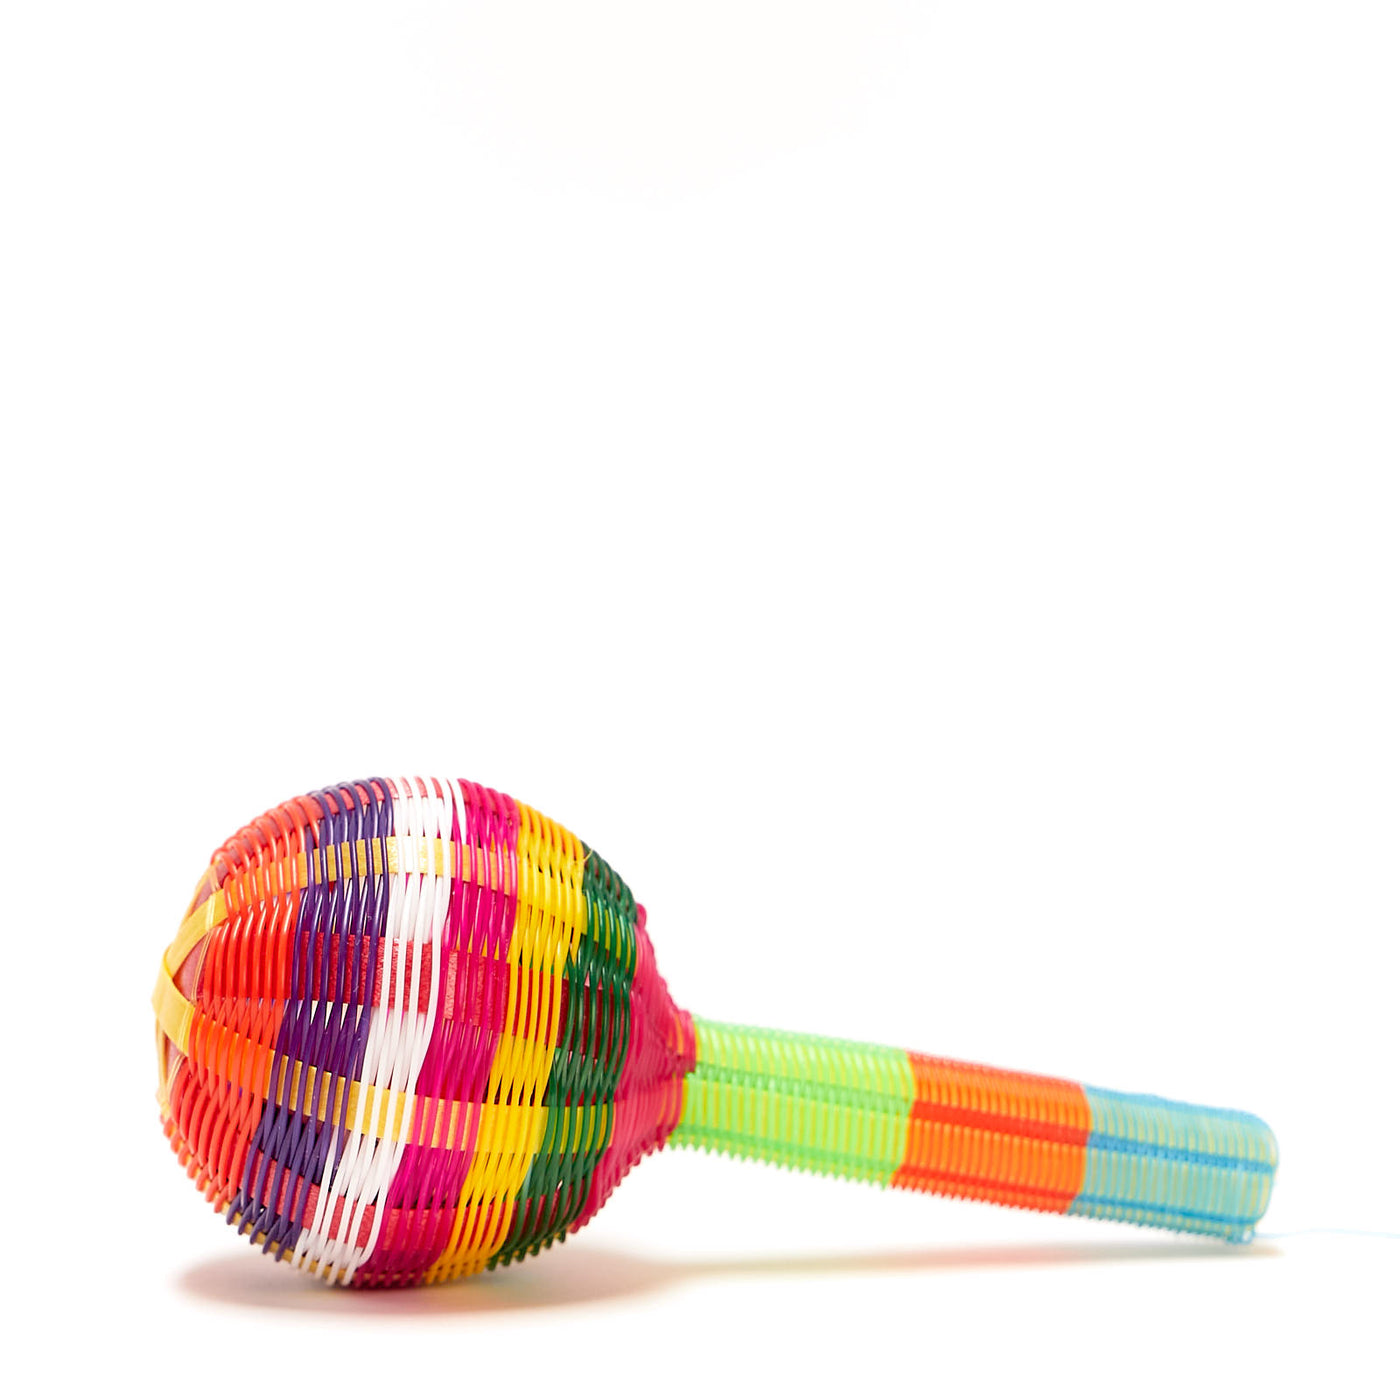 Mexican baby rattle woven with colorful plastic.